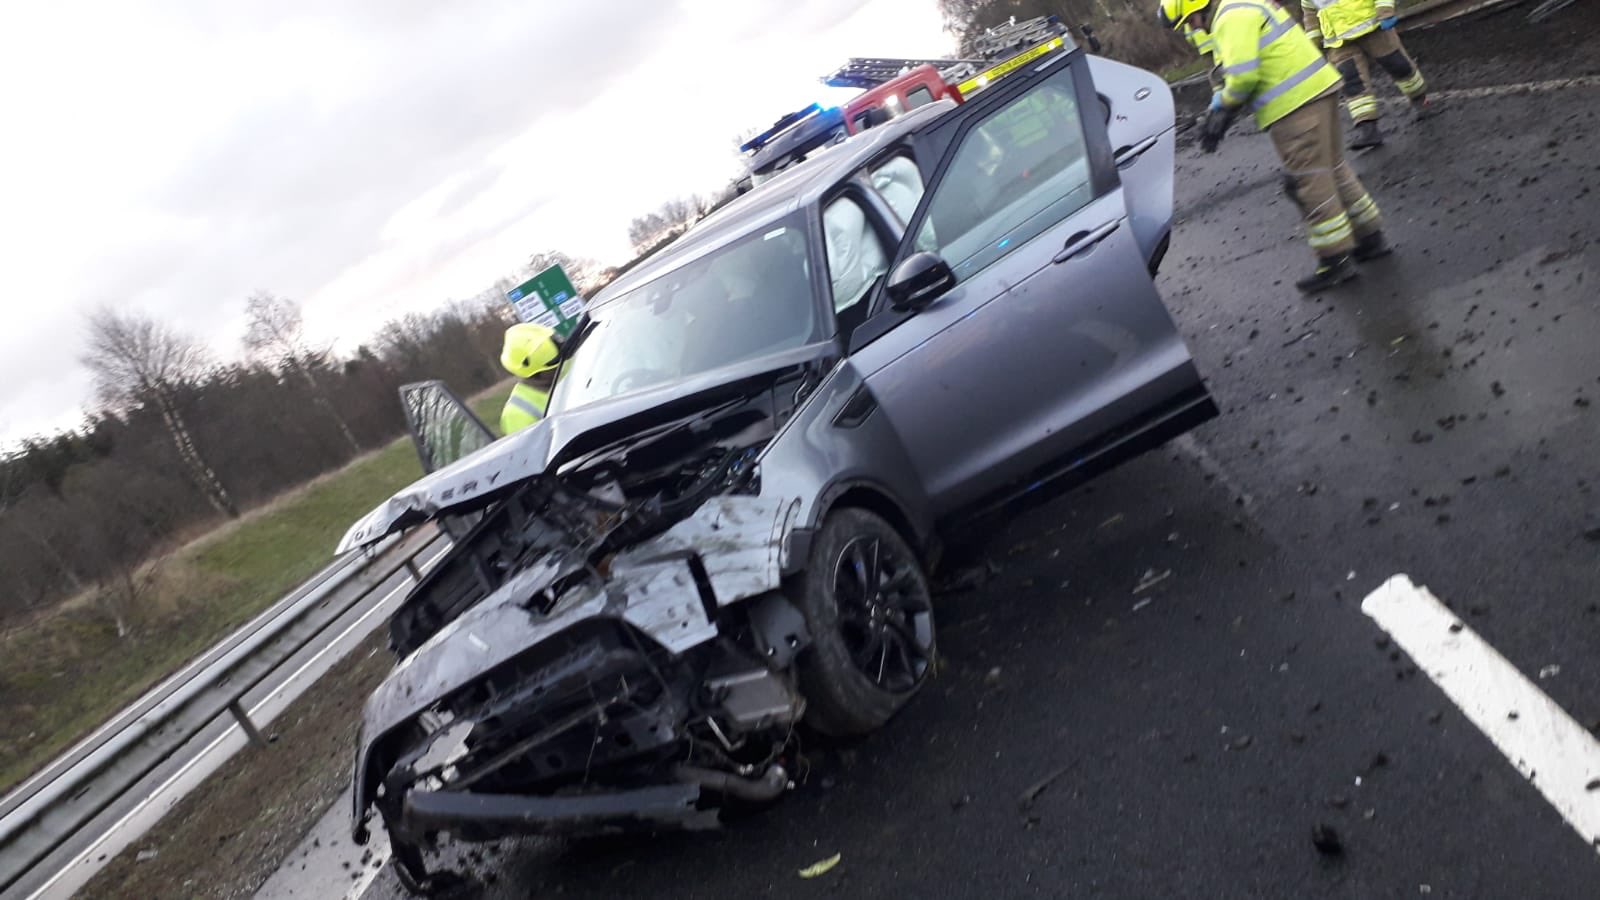 Perth comedian Fred MacAulay's car following a crash on the A9